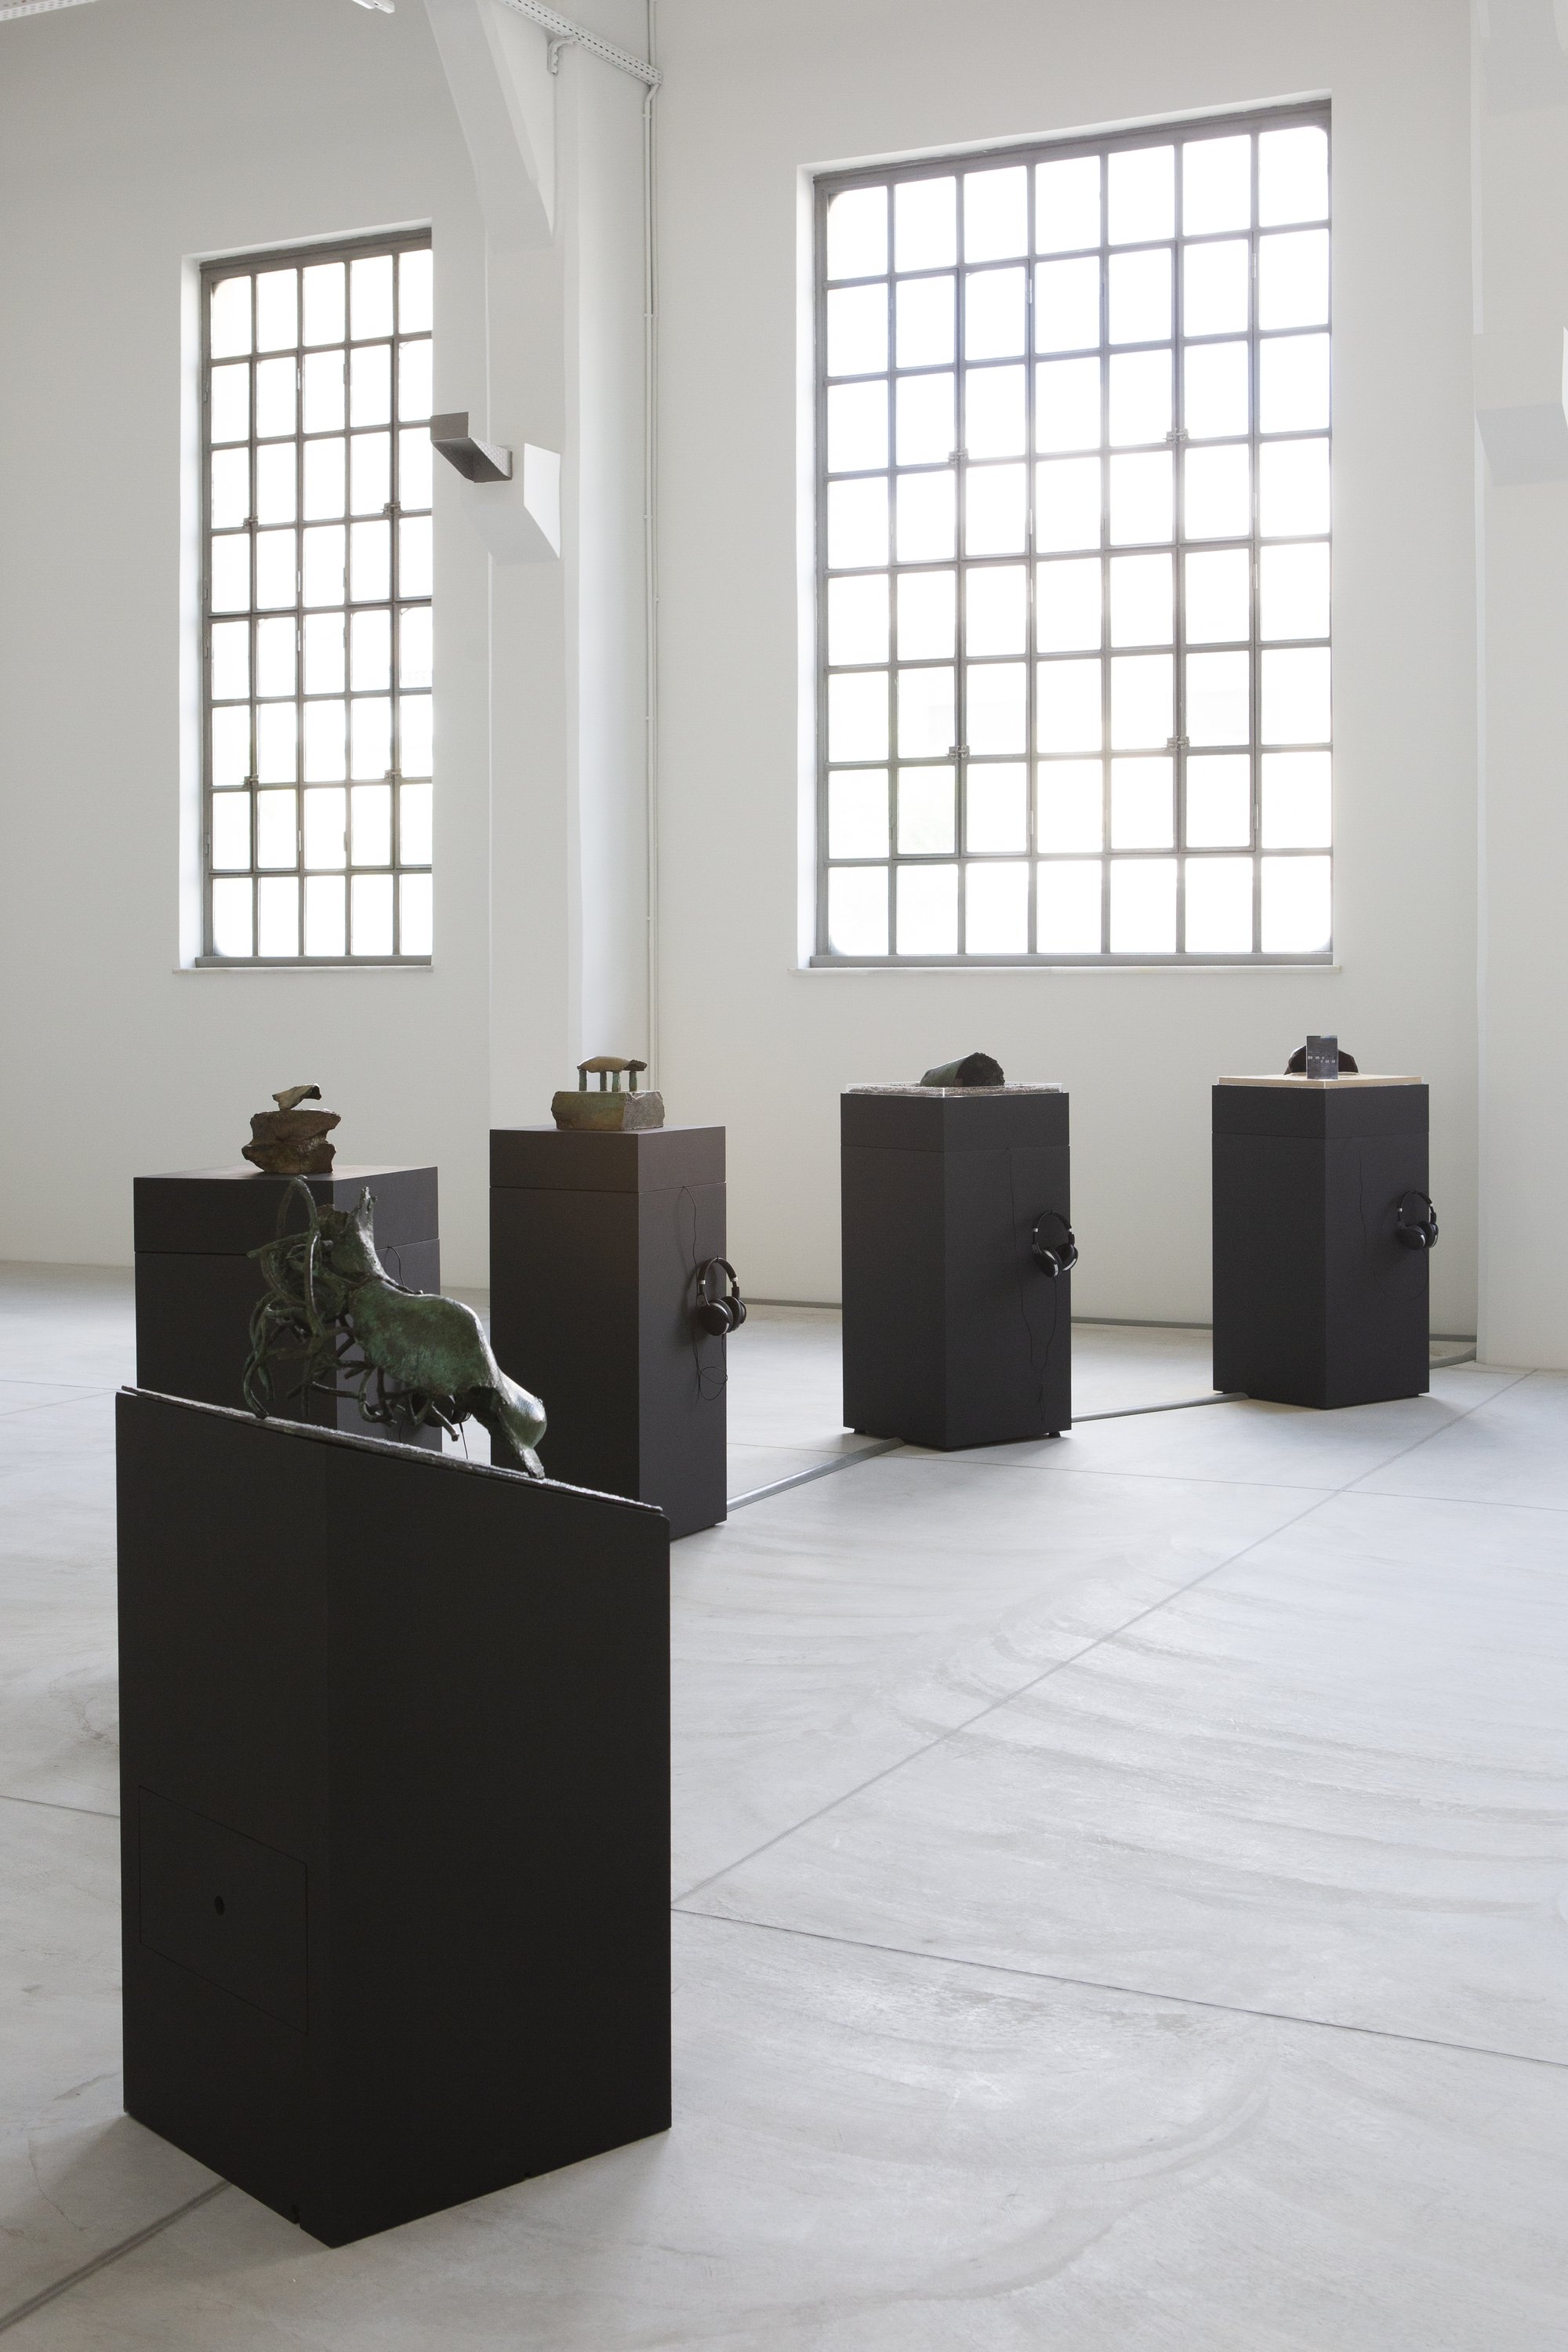 Liliane Lijn, Early Events, Five sculptures, patinated bronze, freestanding painted MDF bases and media players, dimensions variable, 1996-2000. Installation view, Portals, NEON, Former Tobacco Factory, 2021